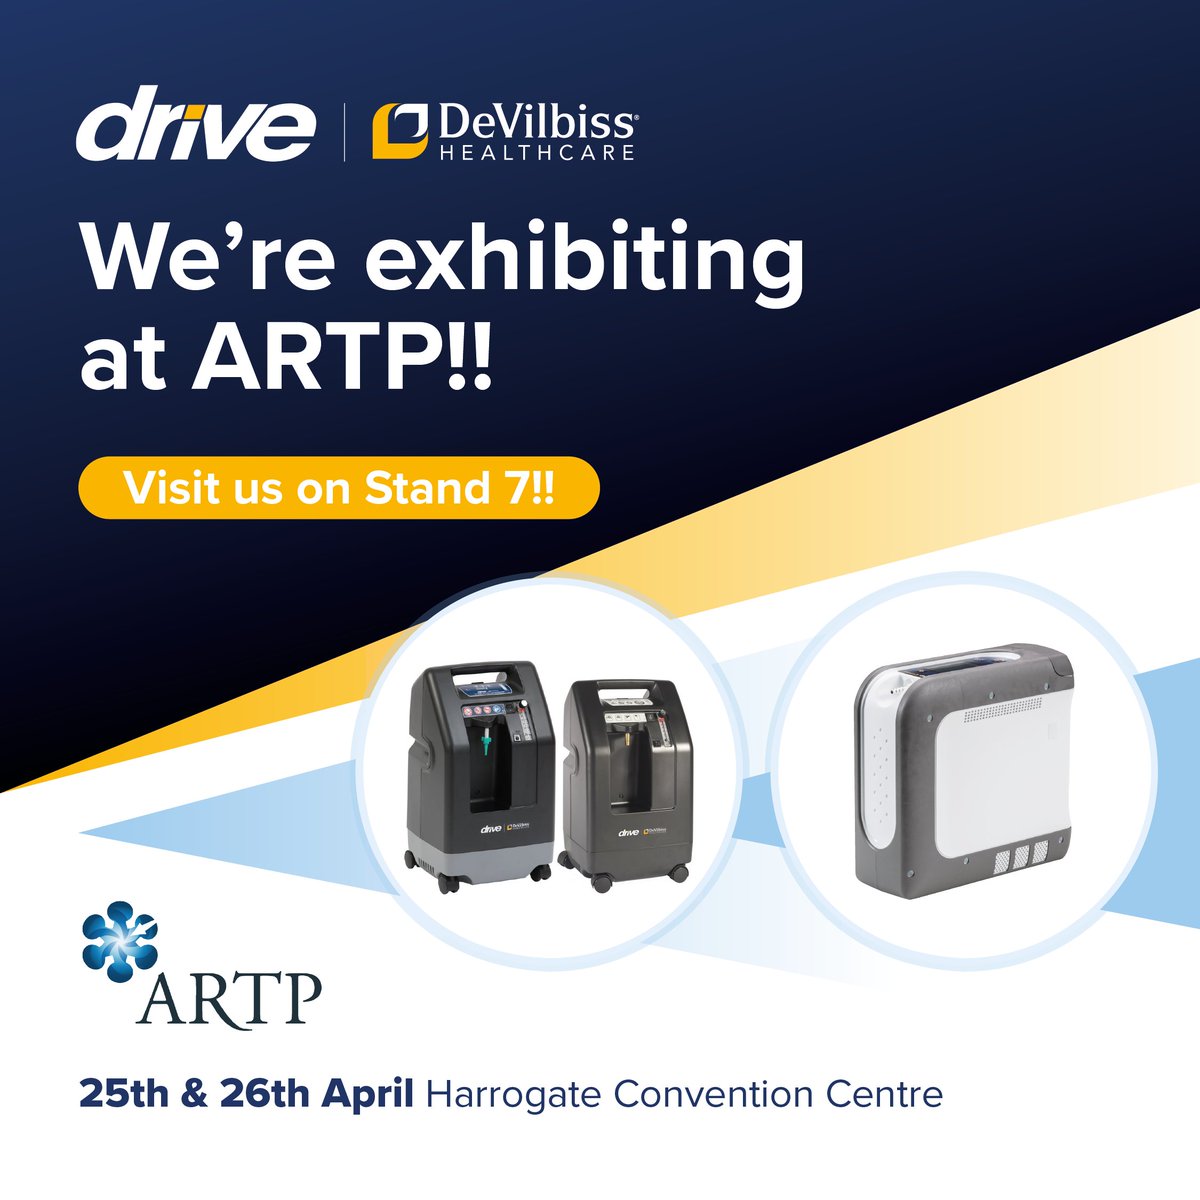 Excited to be exhibiting at the @ARTP_News Conference in Harrogate April 25th & 26th! Visit us at Stand 7 to see our full range of home oxygen products. #RespiratoryTherapy #DriveDeVilbissHealthcare #EnhancingLivesTogether